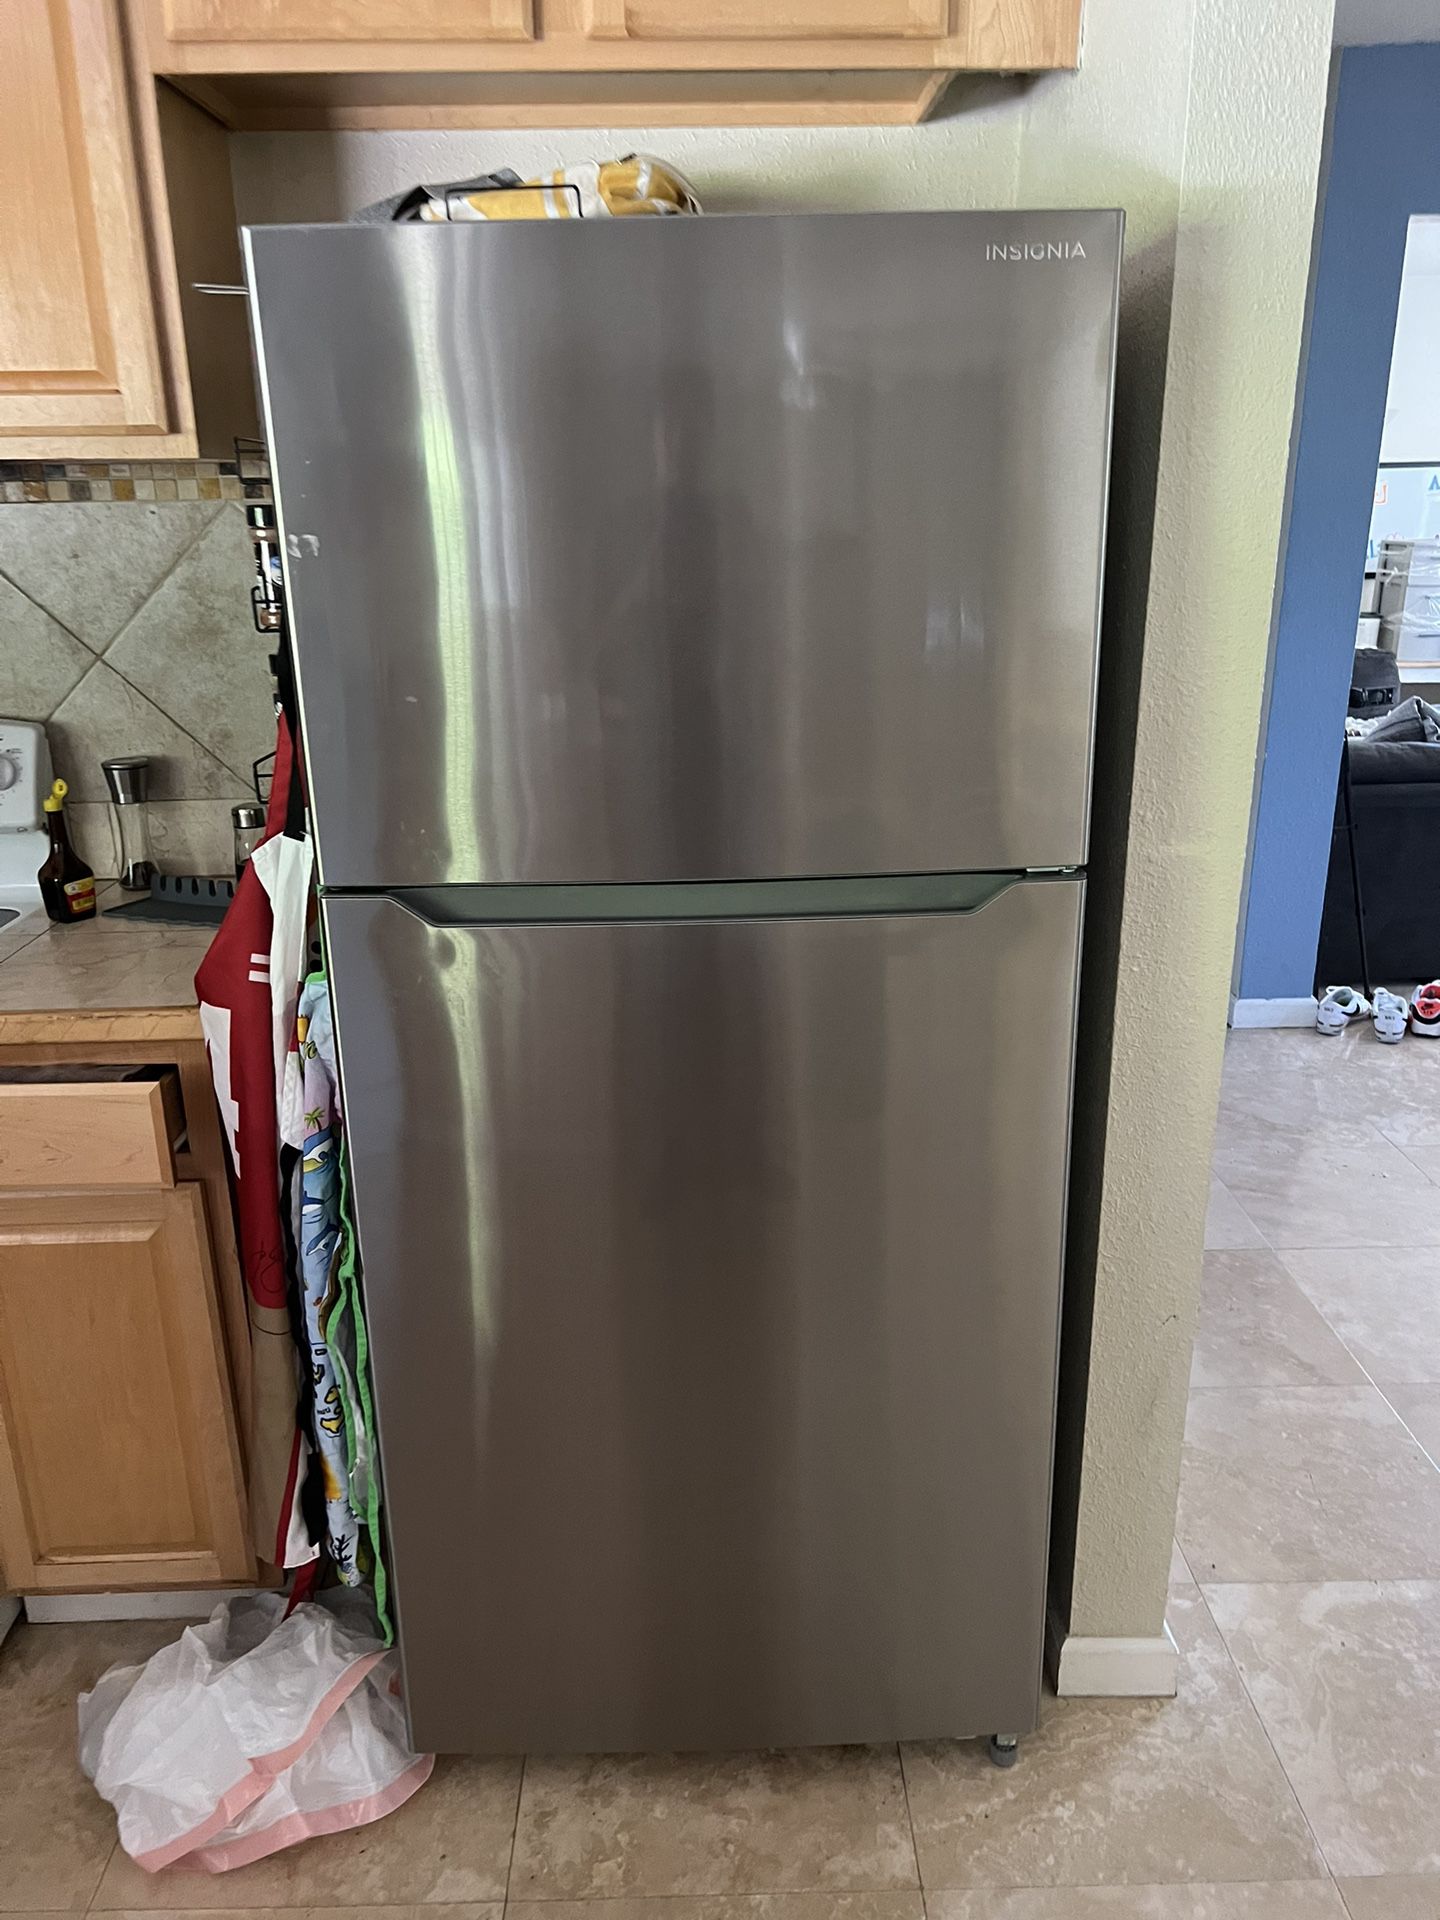 20.5 Cu. Ft. Top-Freezer Refrigerator - 3 MONTHS OLD -Stainless Steel